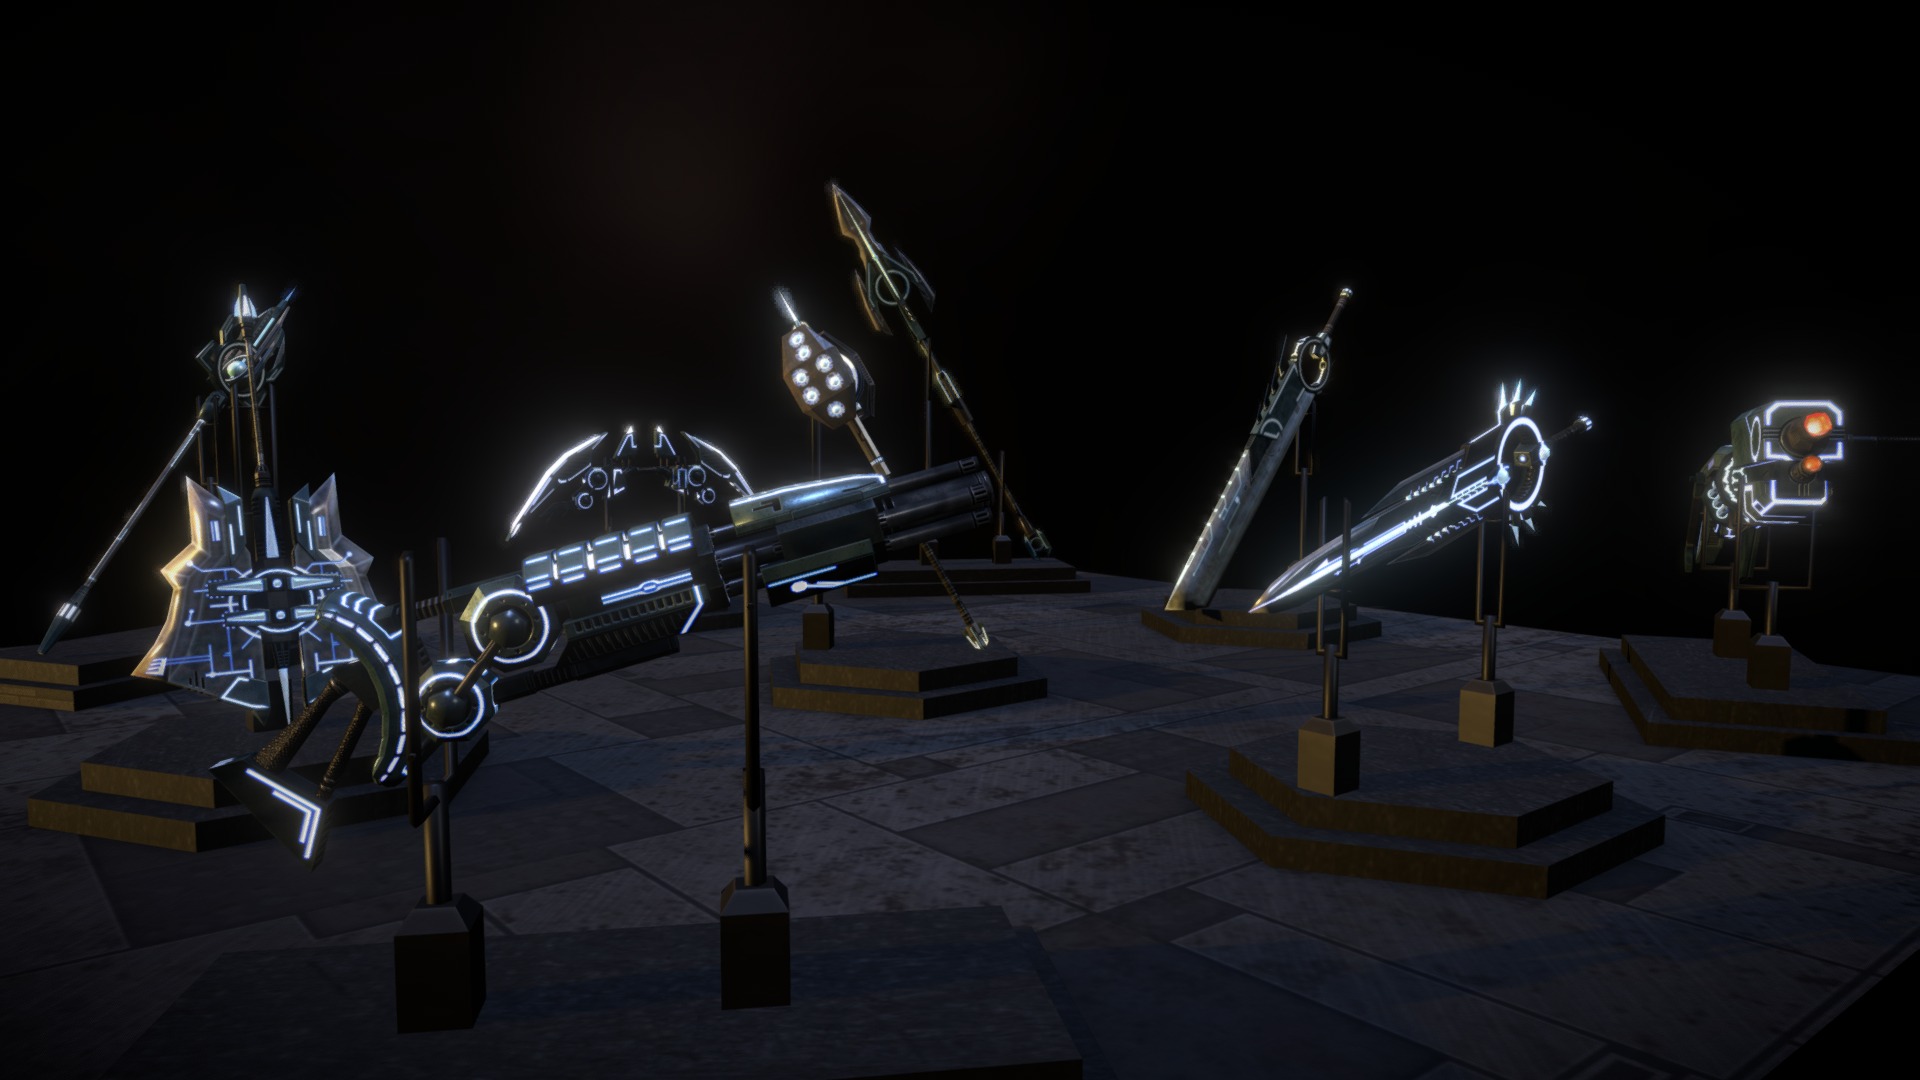 A low-poly weapon set inspired by Tron. Made this set for a sci-fi MMORPG. It looks so much better in Sketchfab though :) Thanks to PBR and various effects available here.

Used a depth of field filter and bloom postprocessing effect to add flavor.

The normal and emissive maps for the staff, spear and buster-type sword have not yet been added so lets just say that the weapons have not yet been &ldquo;activated